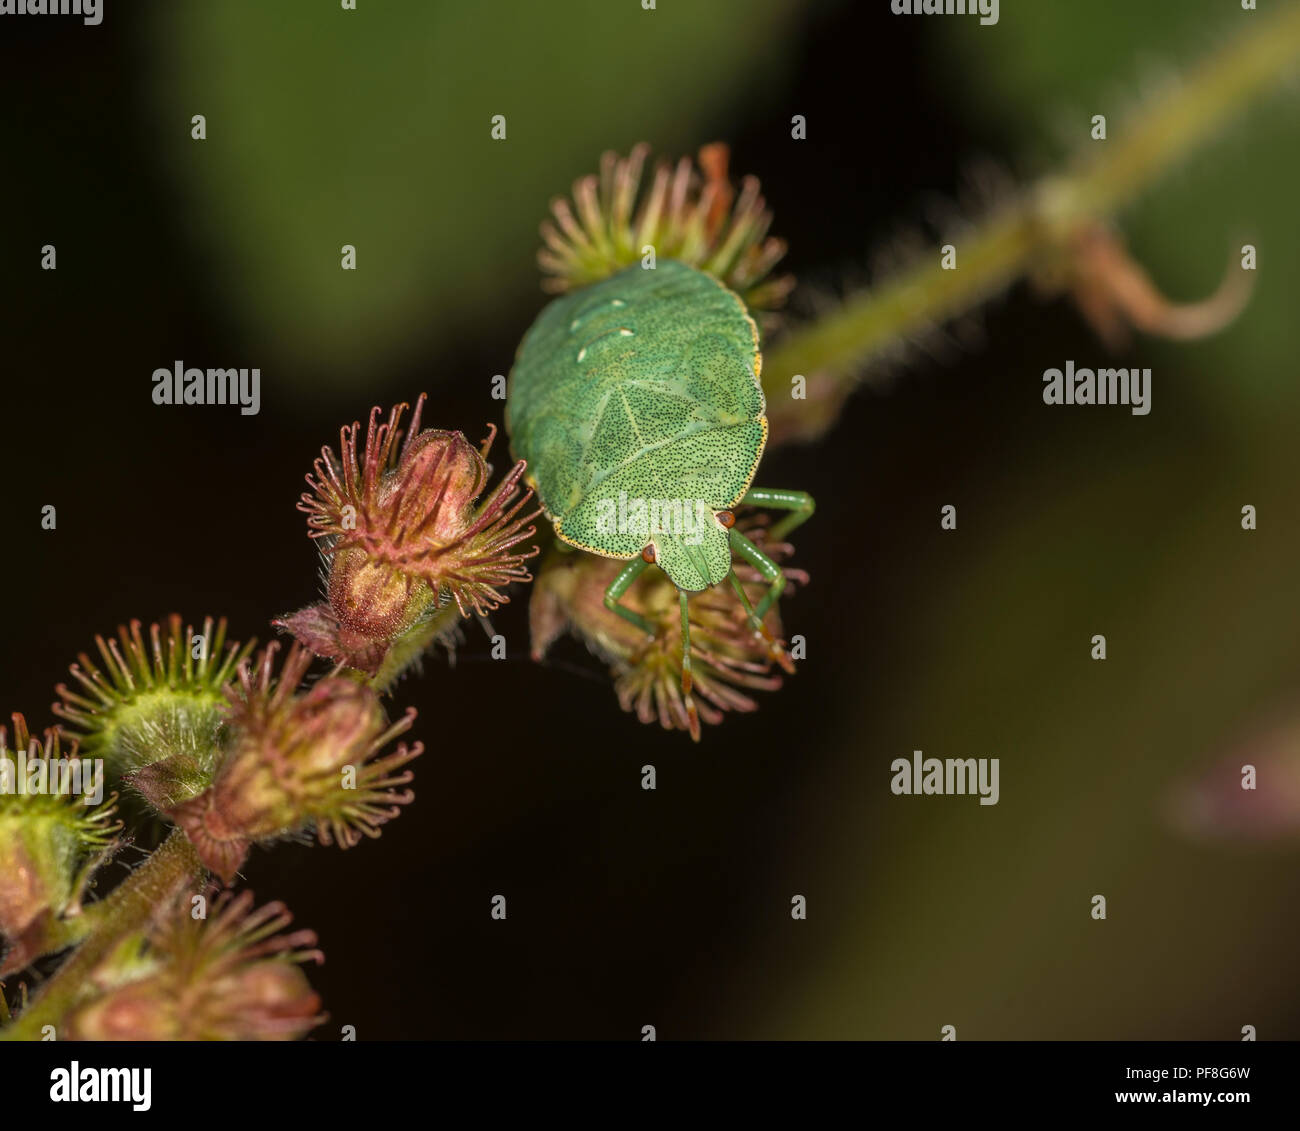 Green shield bug on a branch a plant Stock Photo